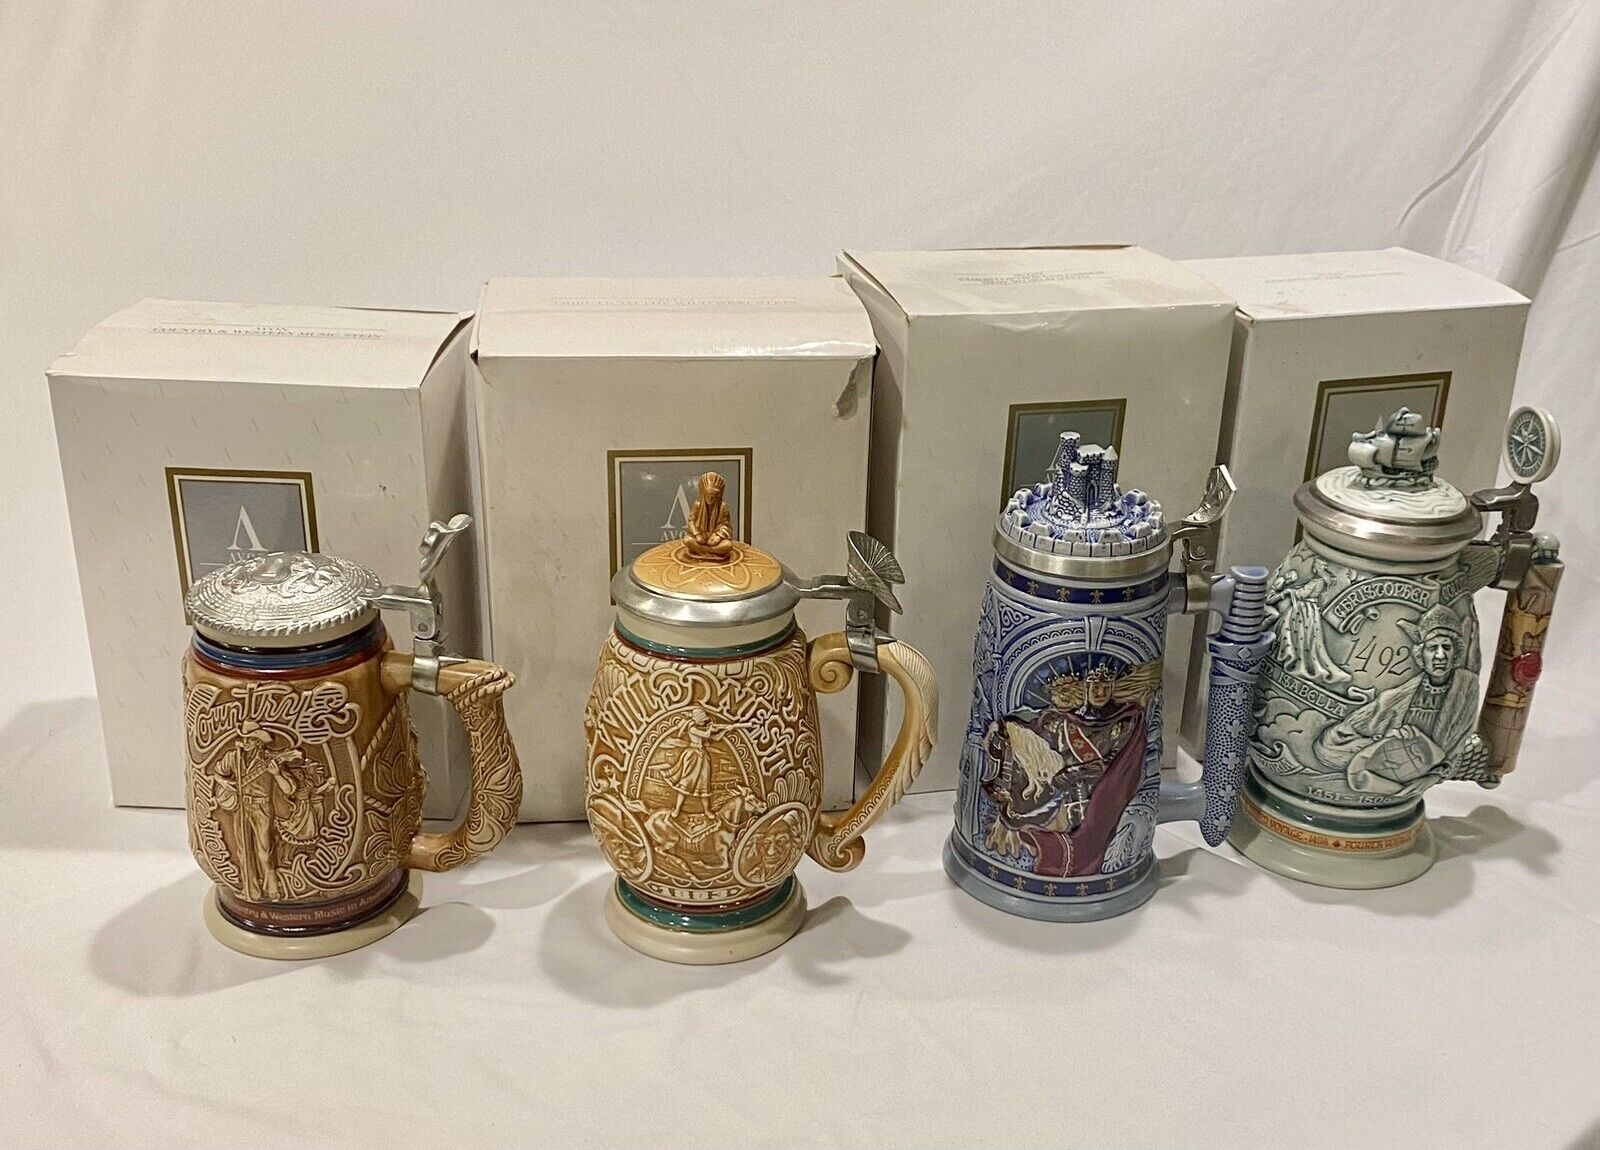 4 Brand new Avon lidded steins hand crafted in Brazil, with original packaging